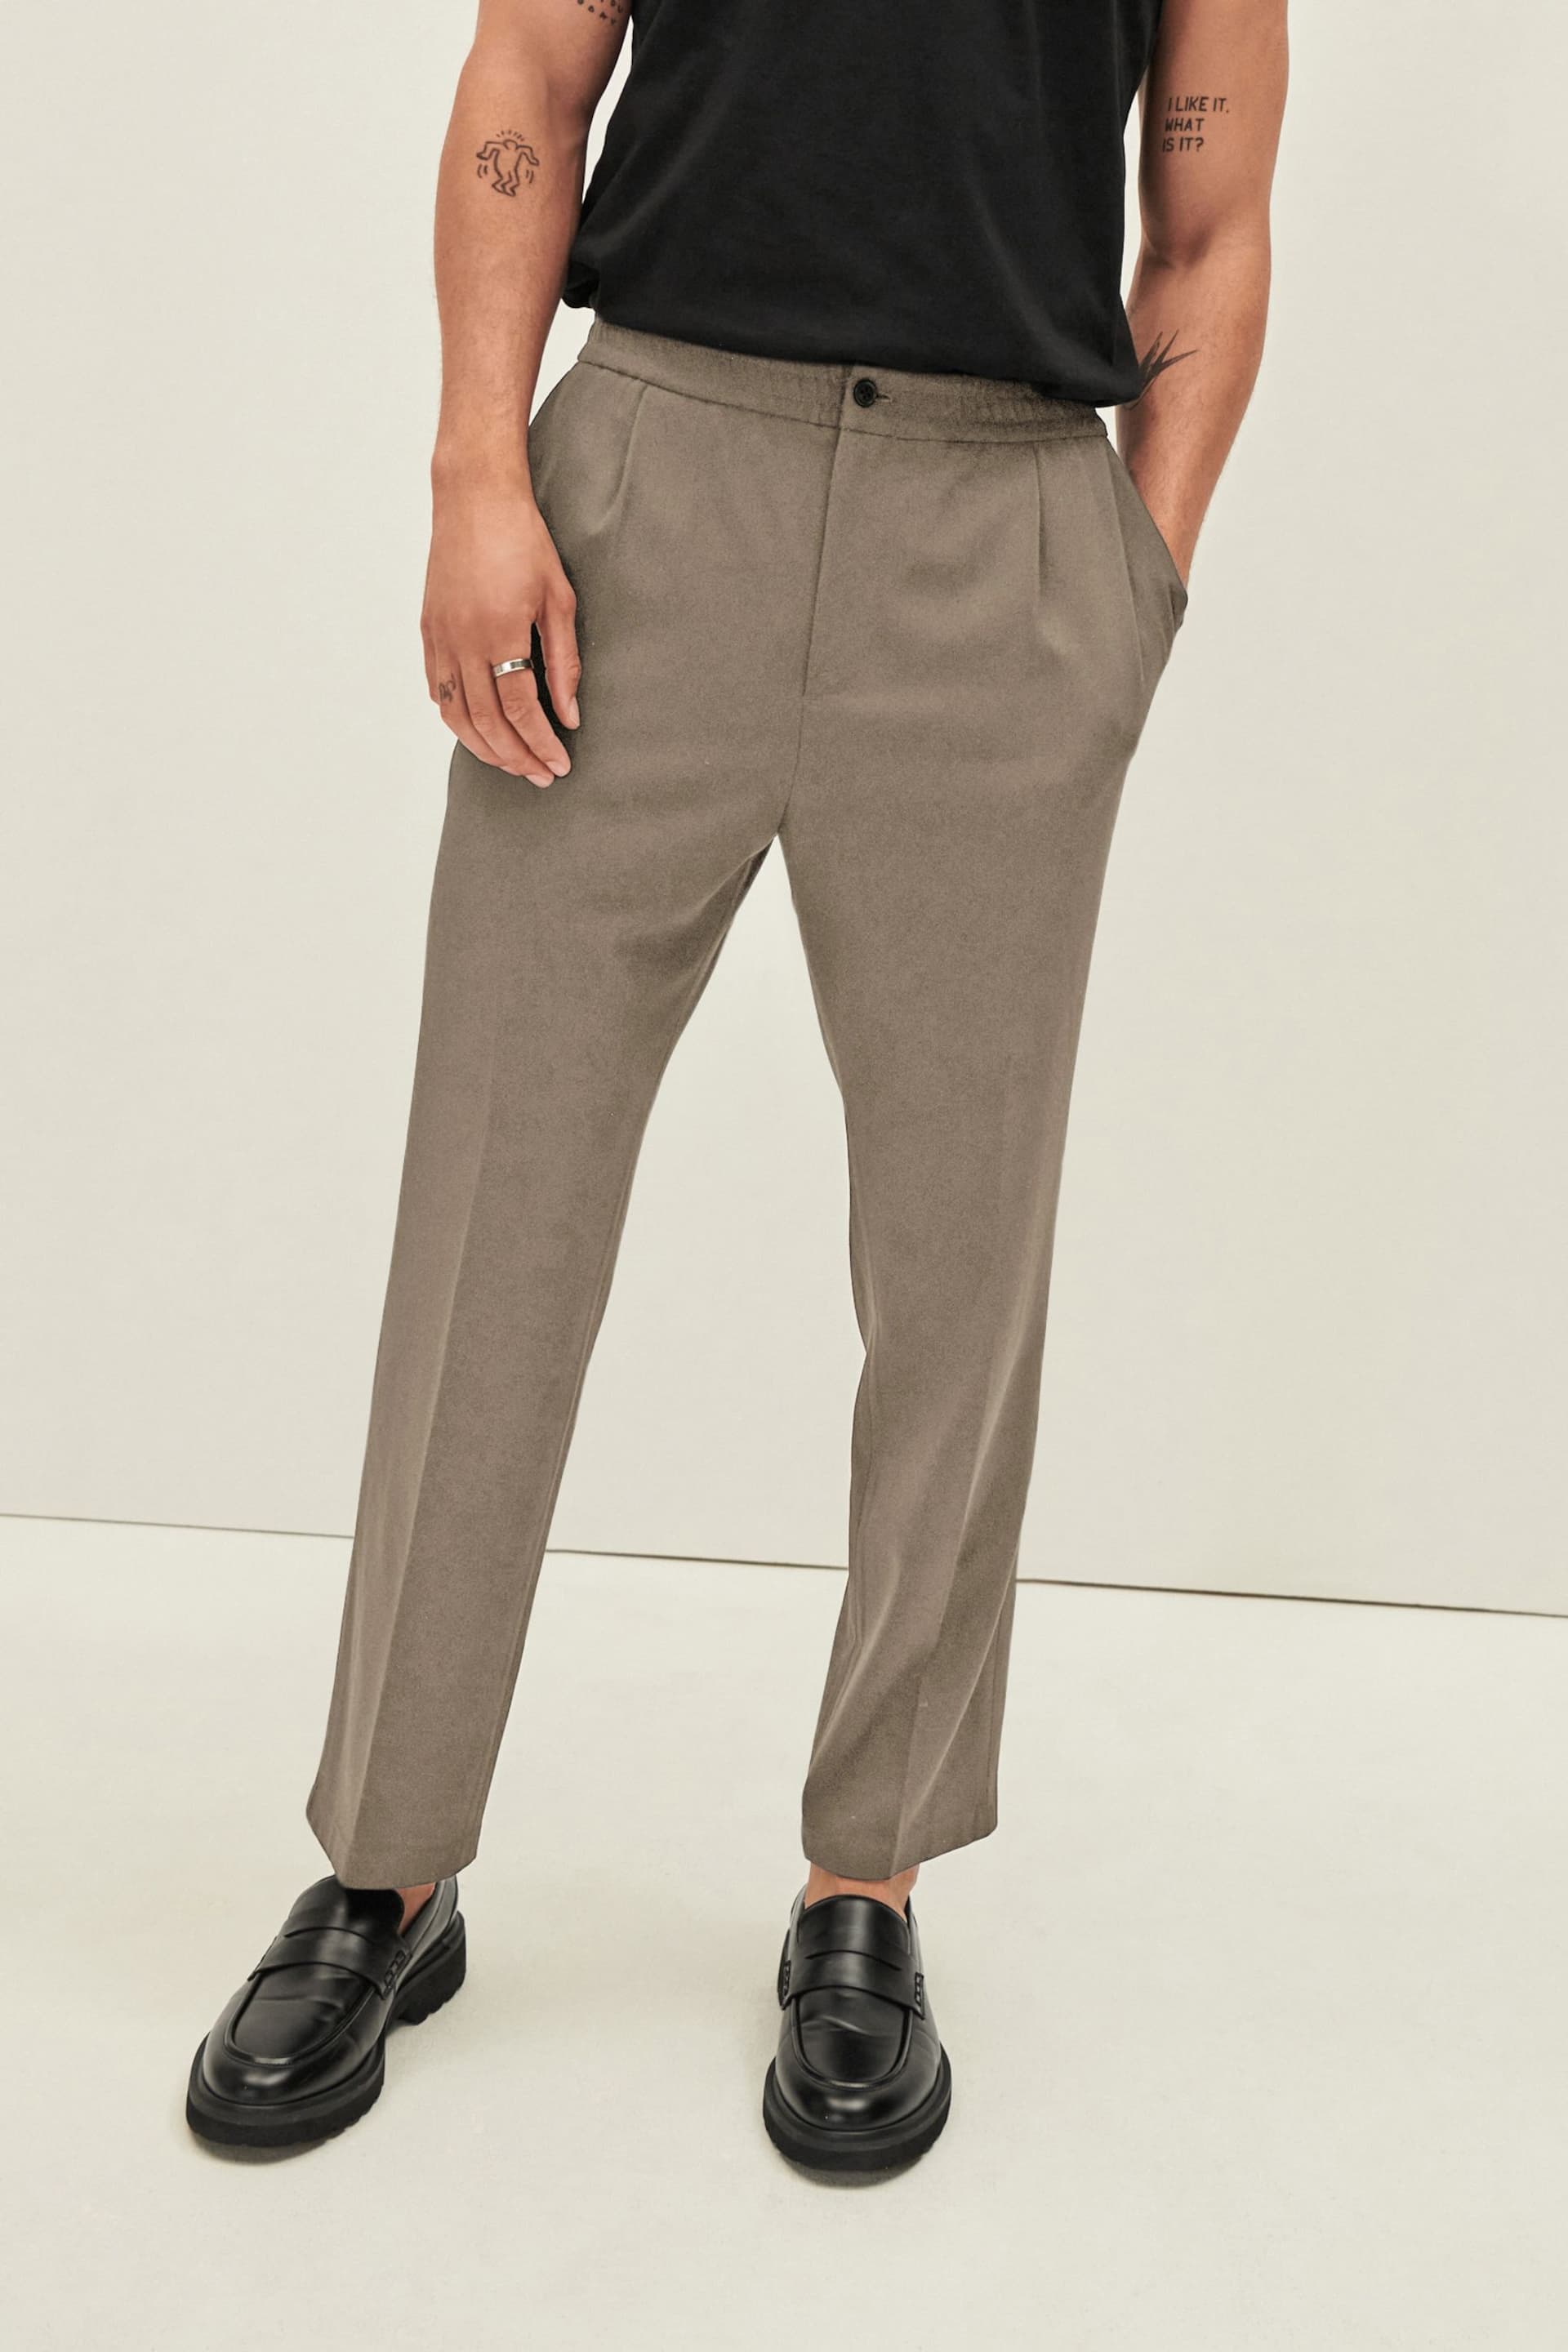 Neutral Relaxed Fit EDIT Jogger Trousers - Image 1 of 7